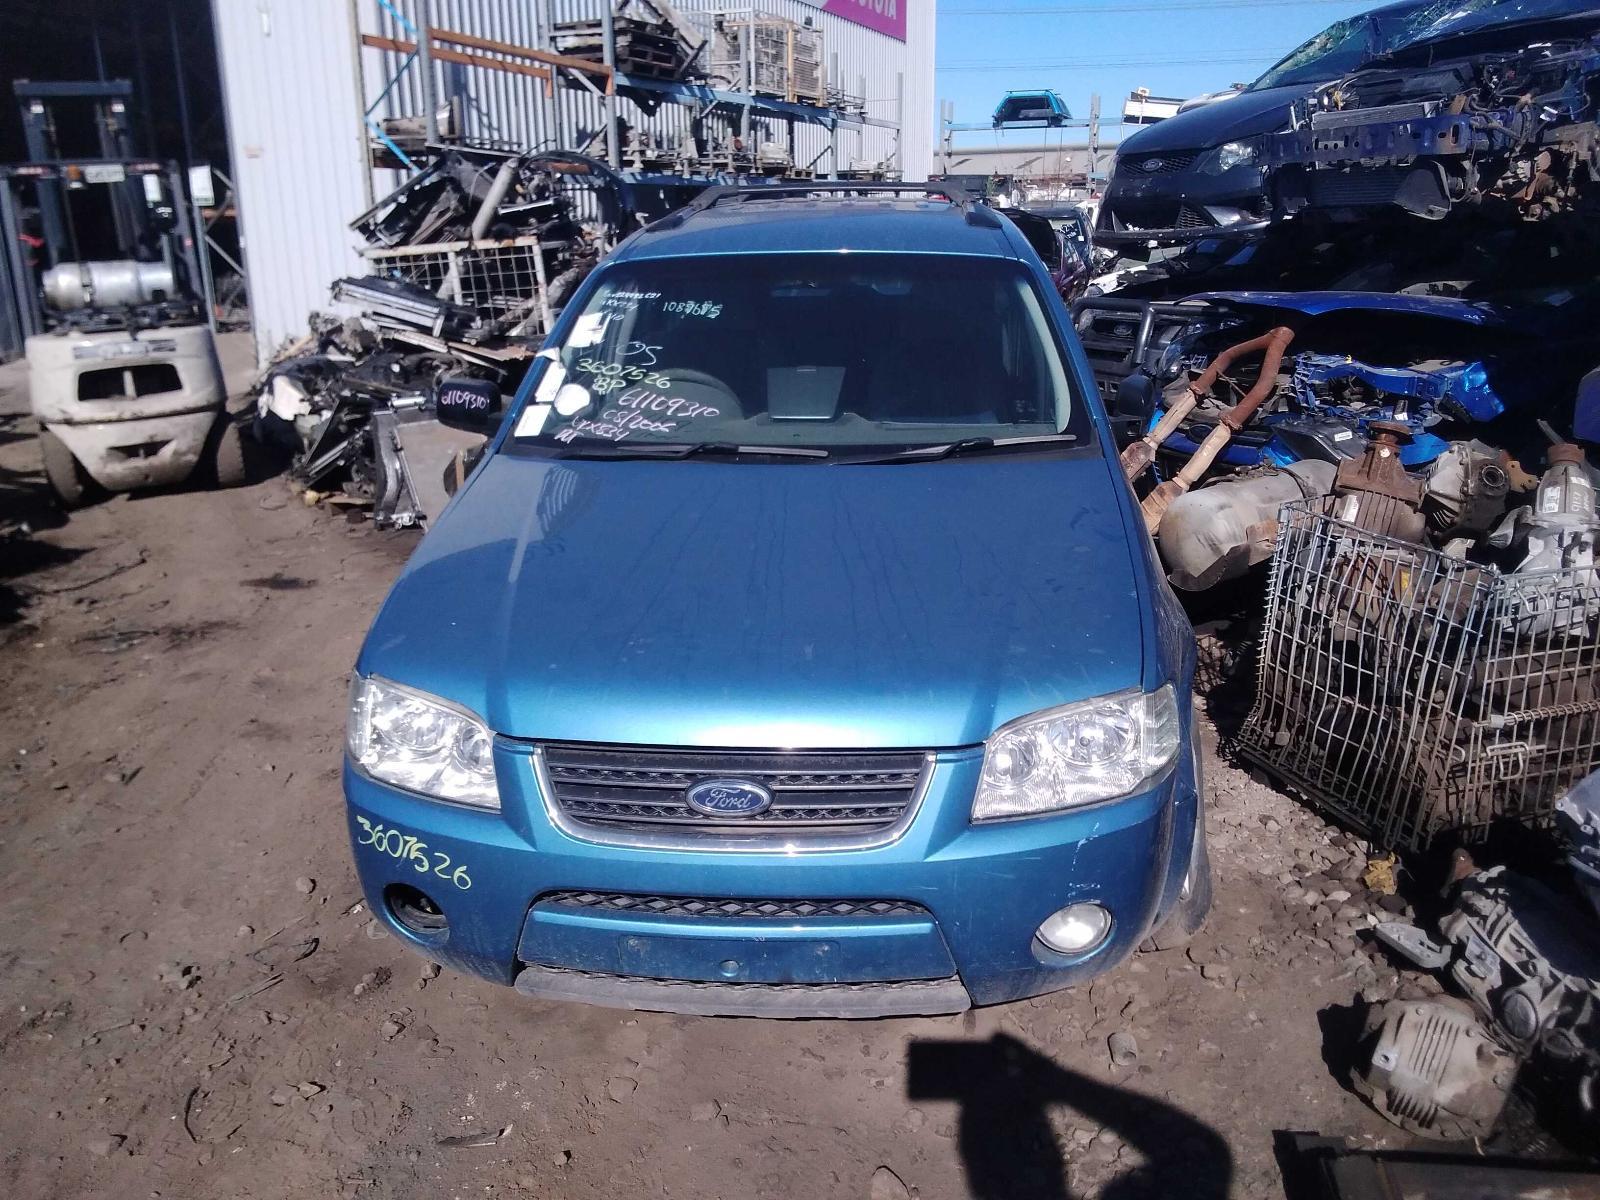 2006 SY FORD TERRITORY AWD PARTS